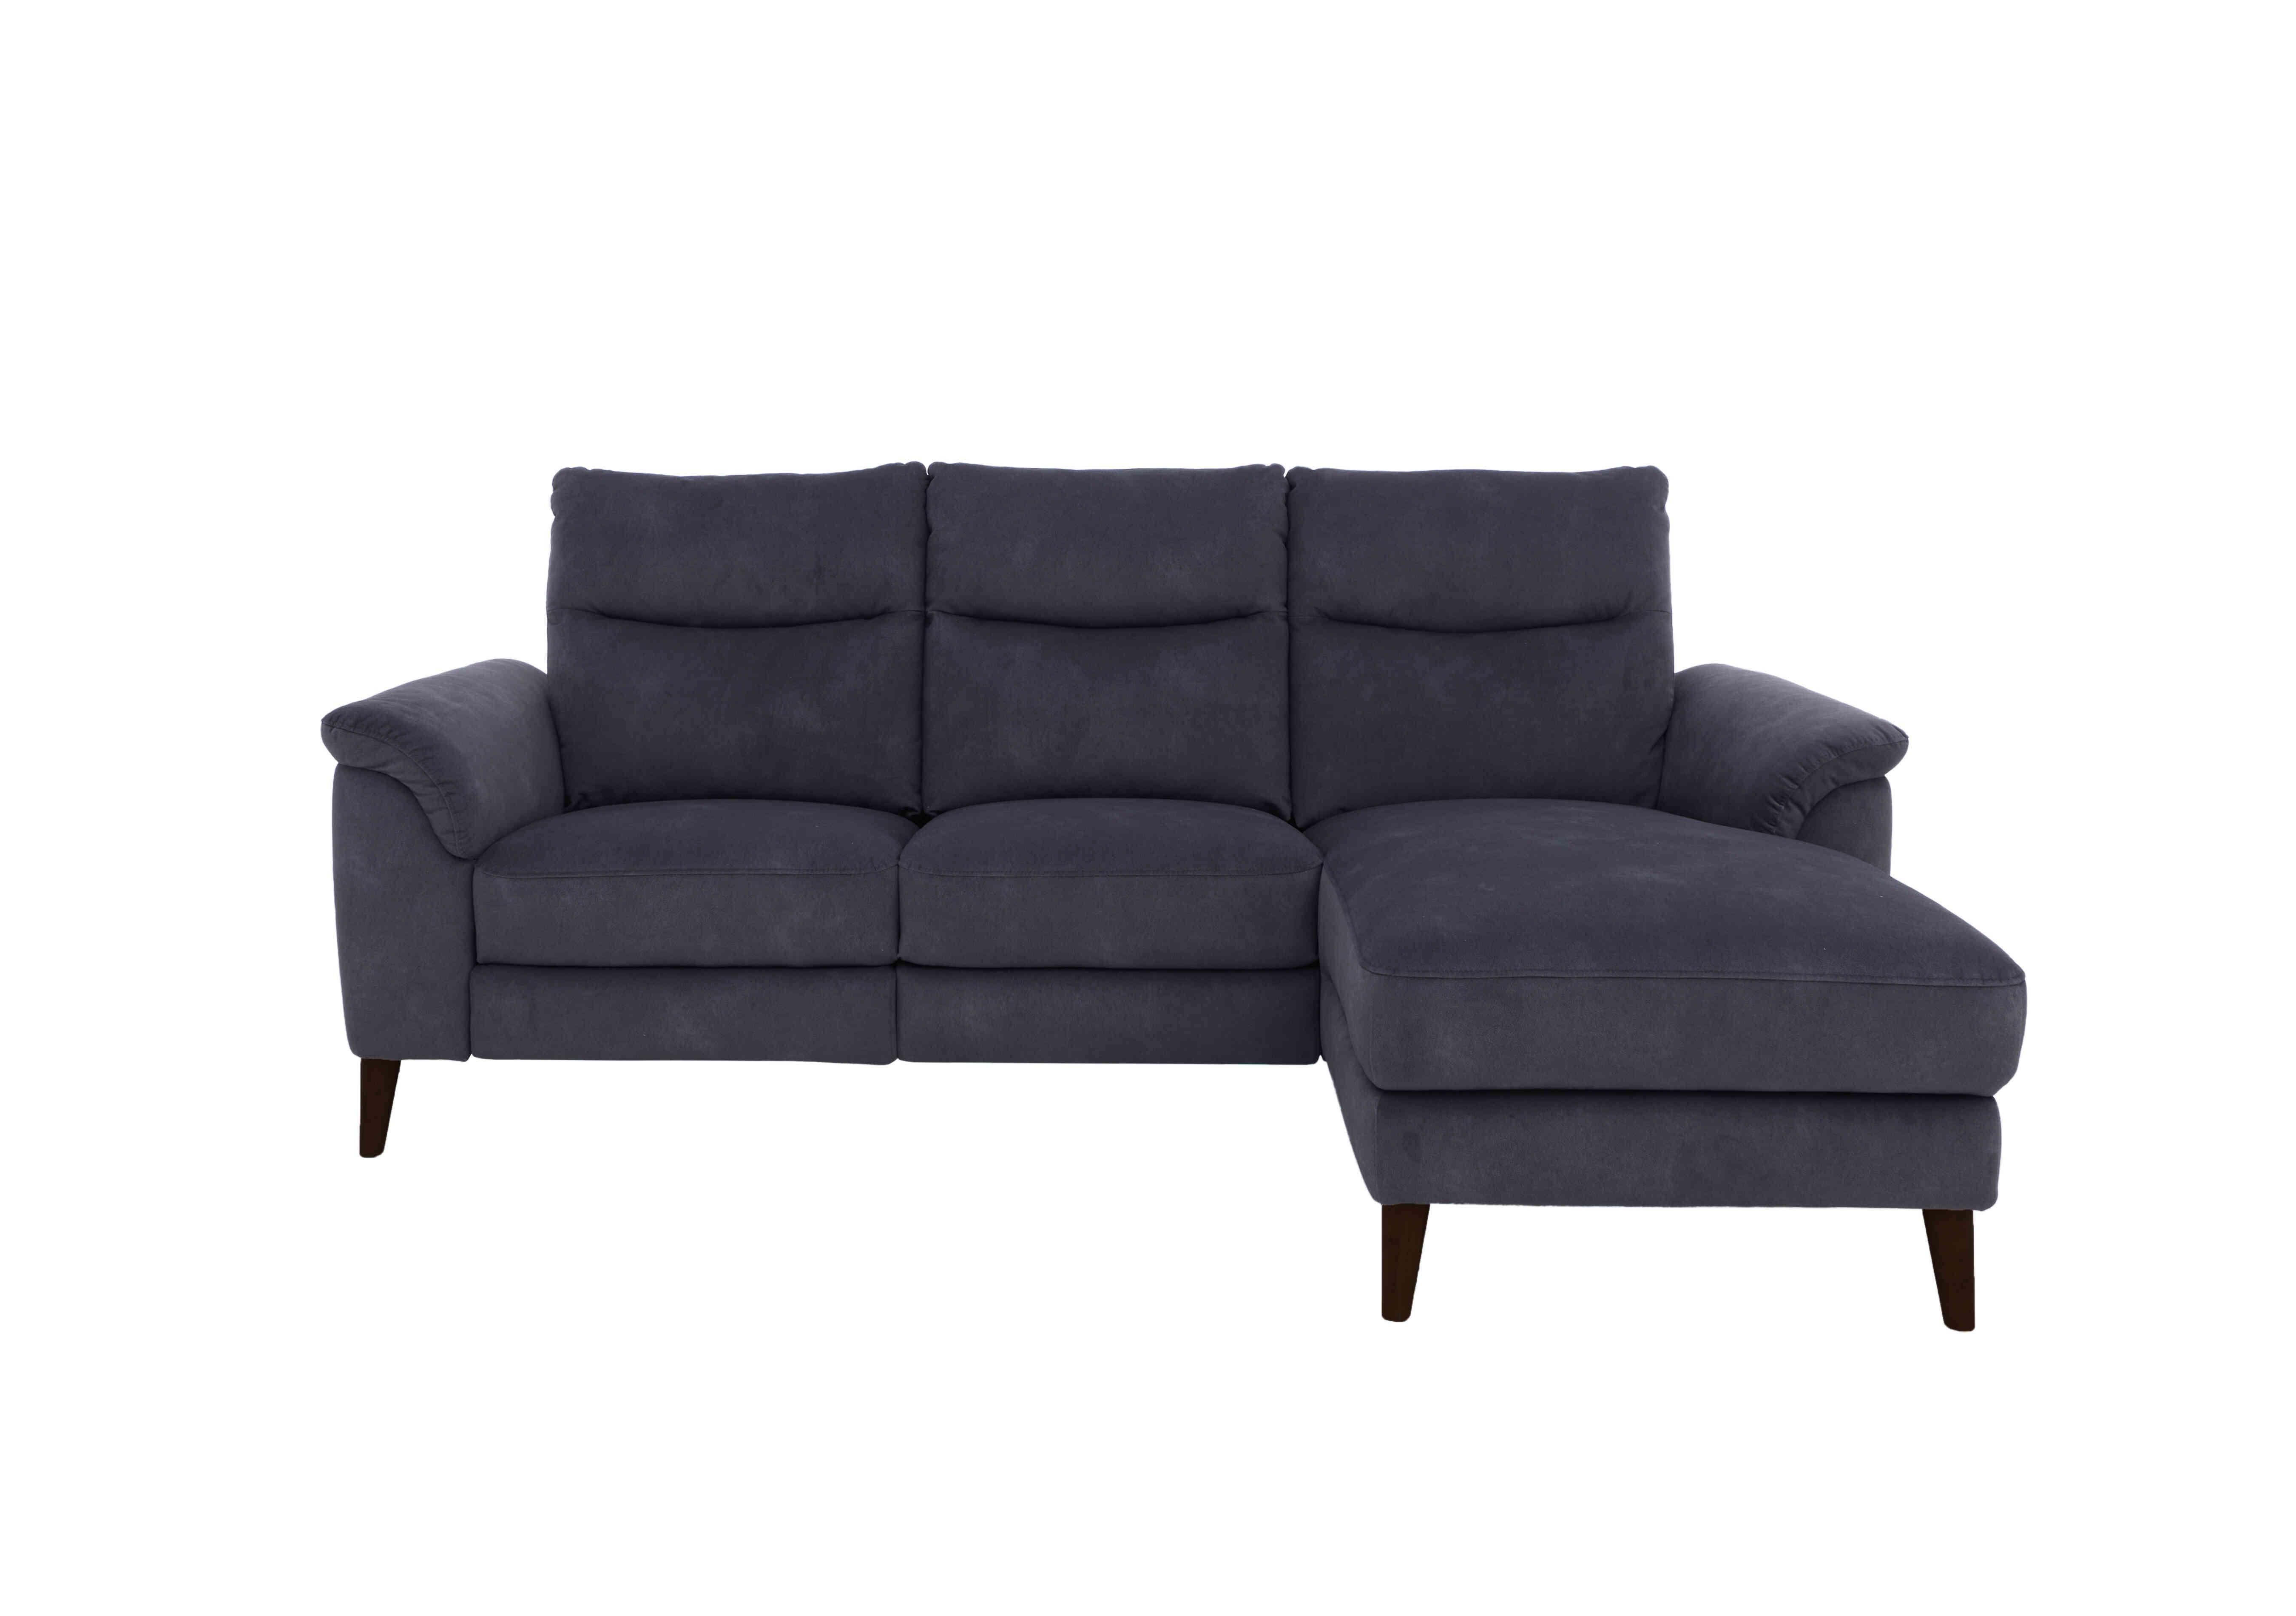 Morgan 3 Seater Fabric Sofa with Chaise End in Shadow Dexter 19 43519 on Furniture Village